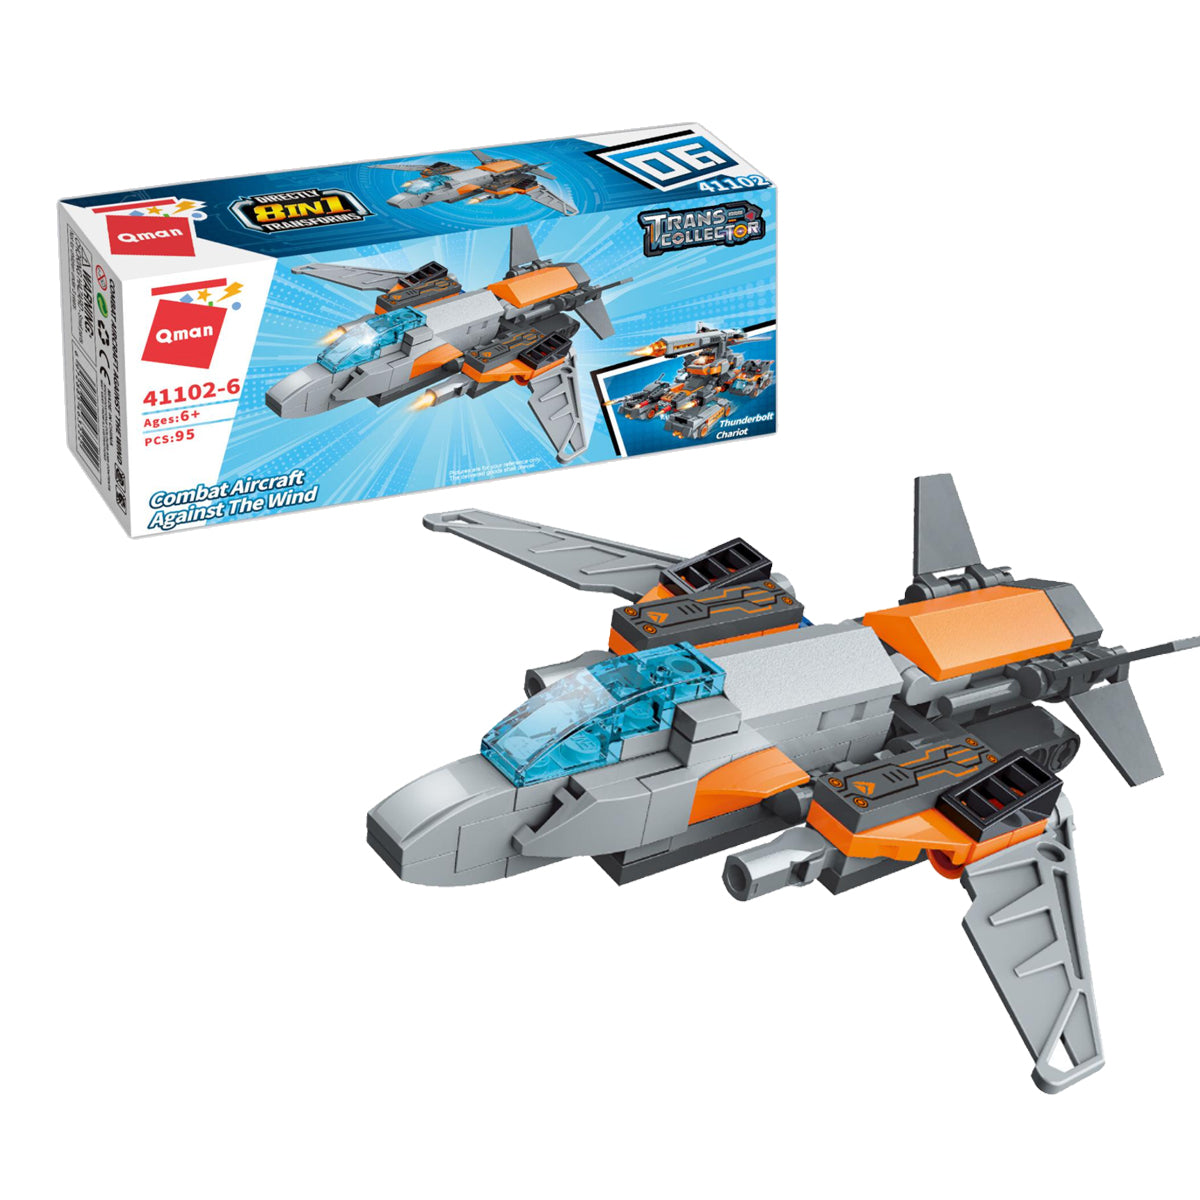 Qman Trans-Collector Thunderbolt Chariot 8 in 1: Combat Aircraft Against The Wind (7681412956384)